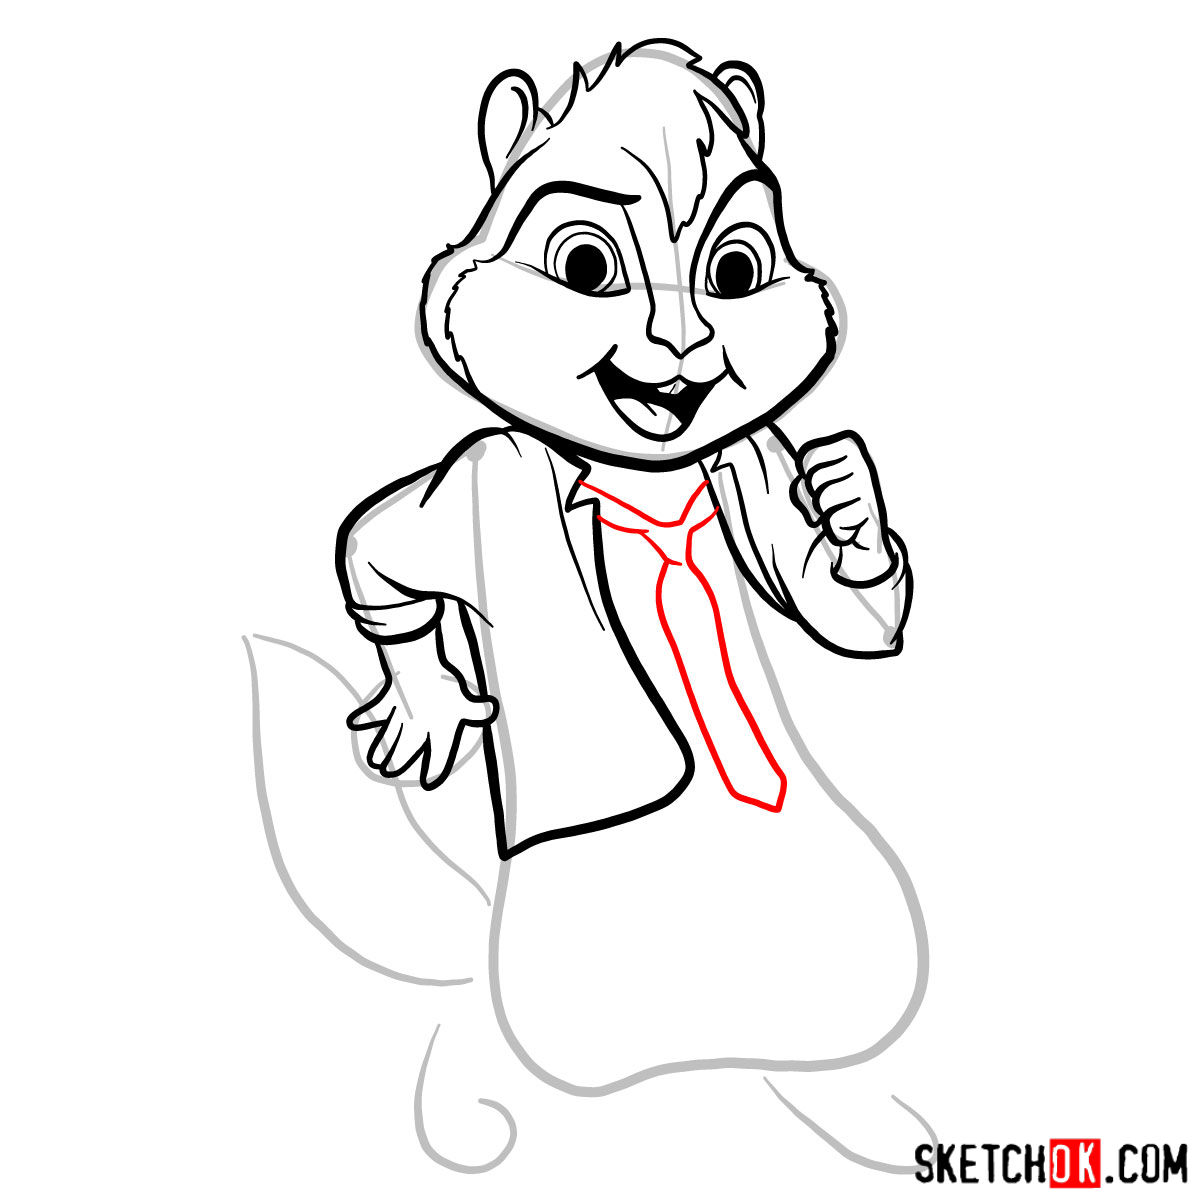 How to draw Alvin from Alvin and the Chipmunks - step 10